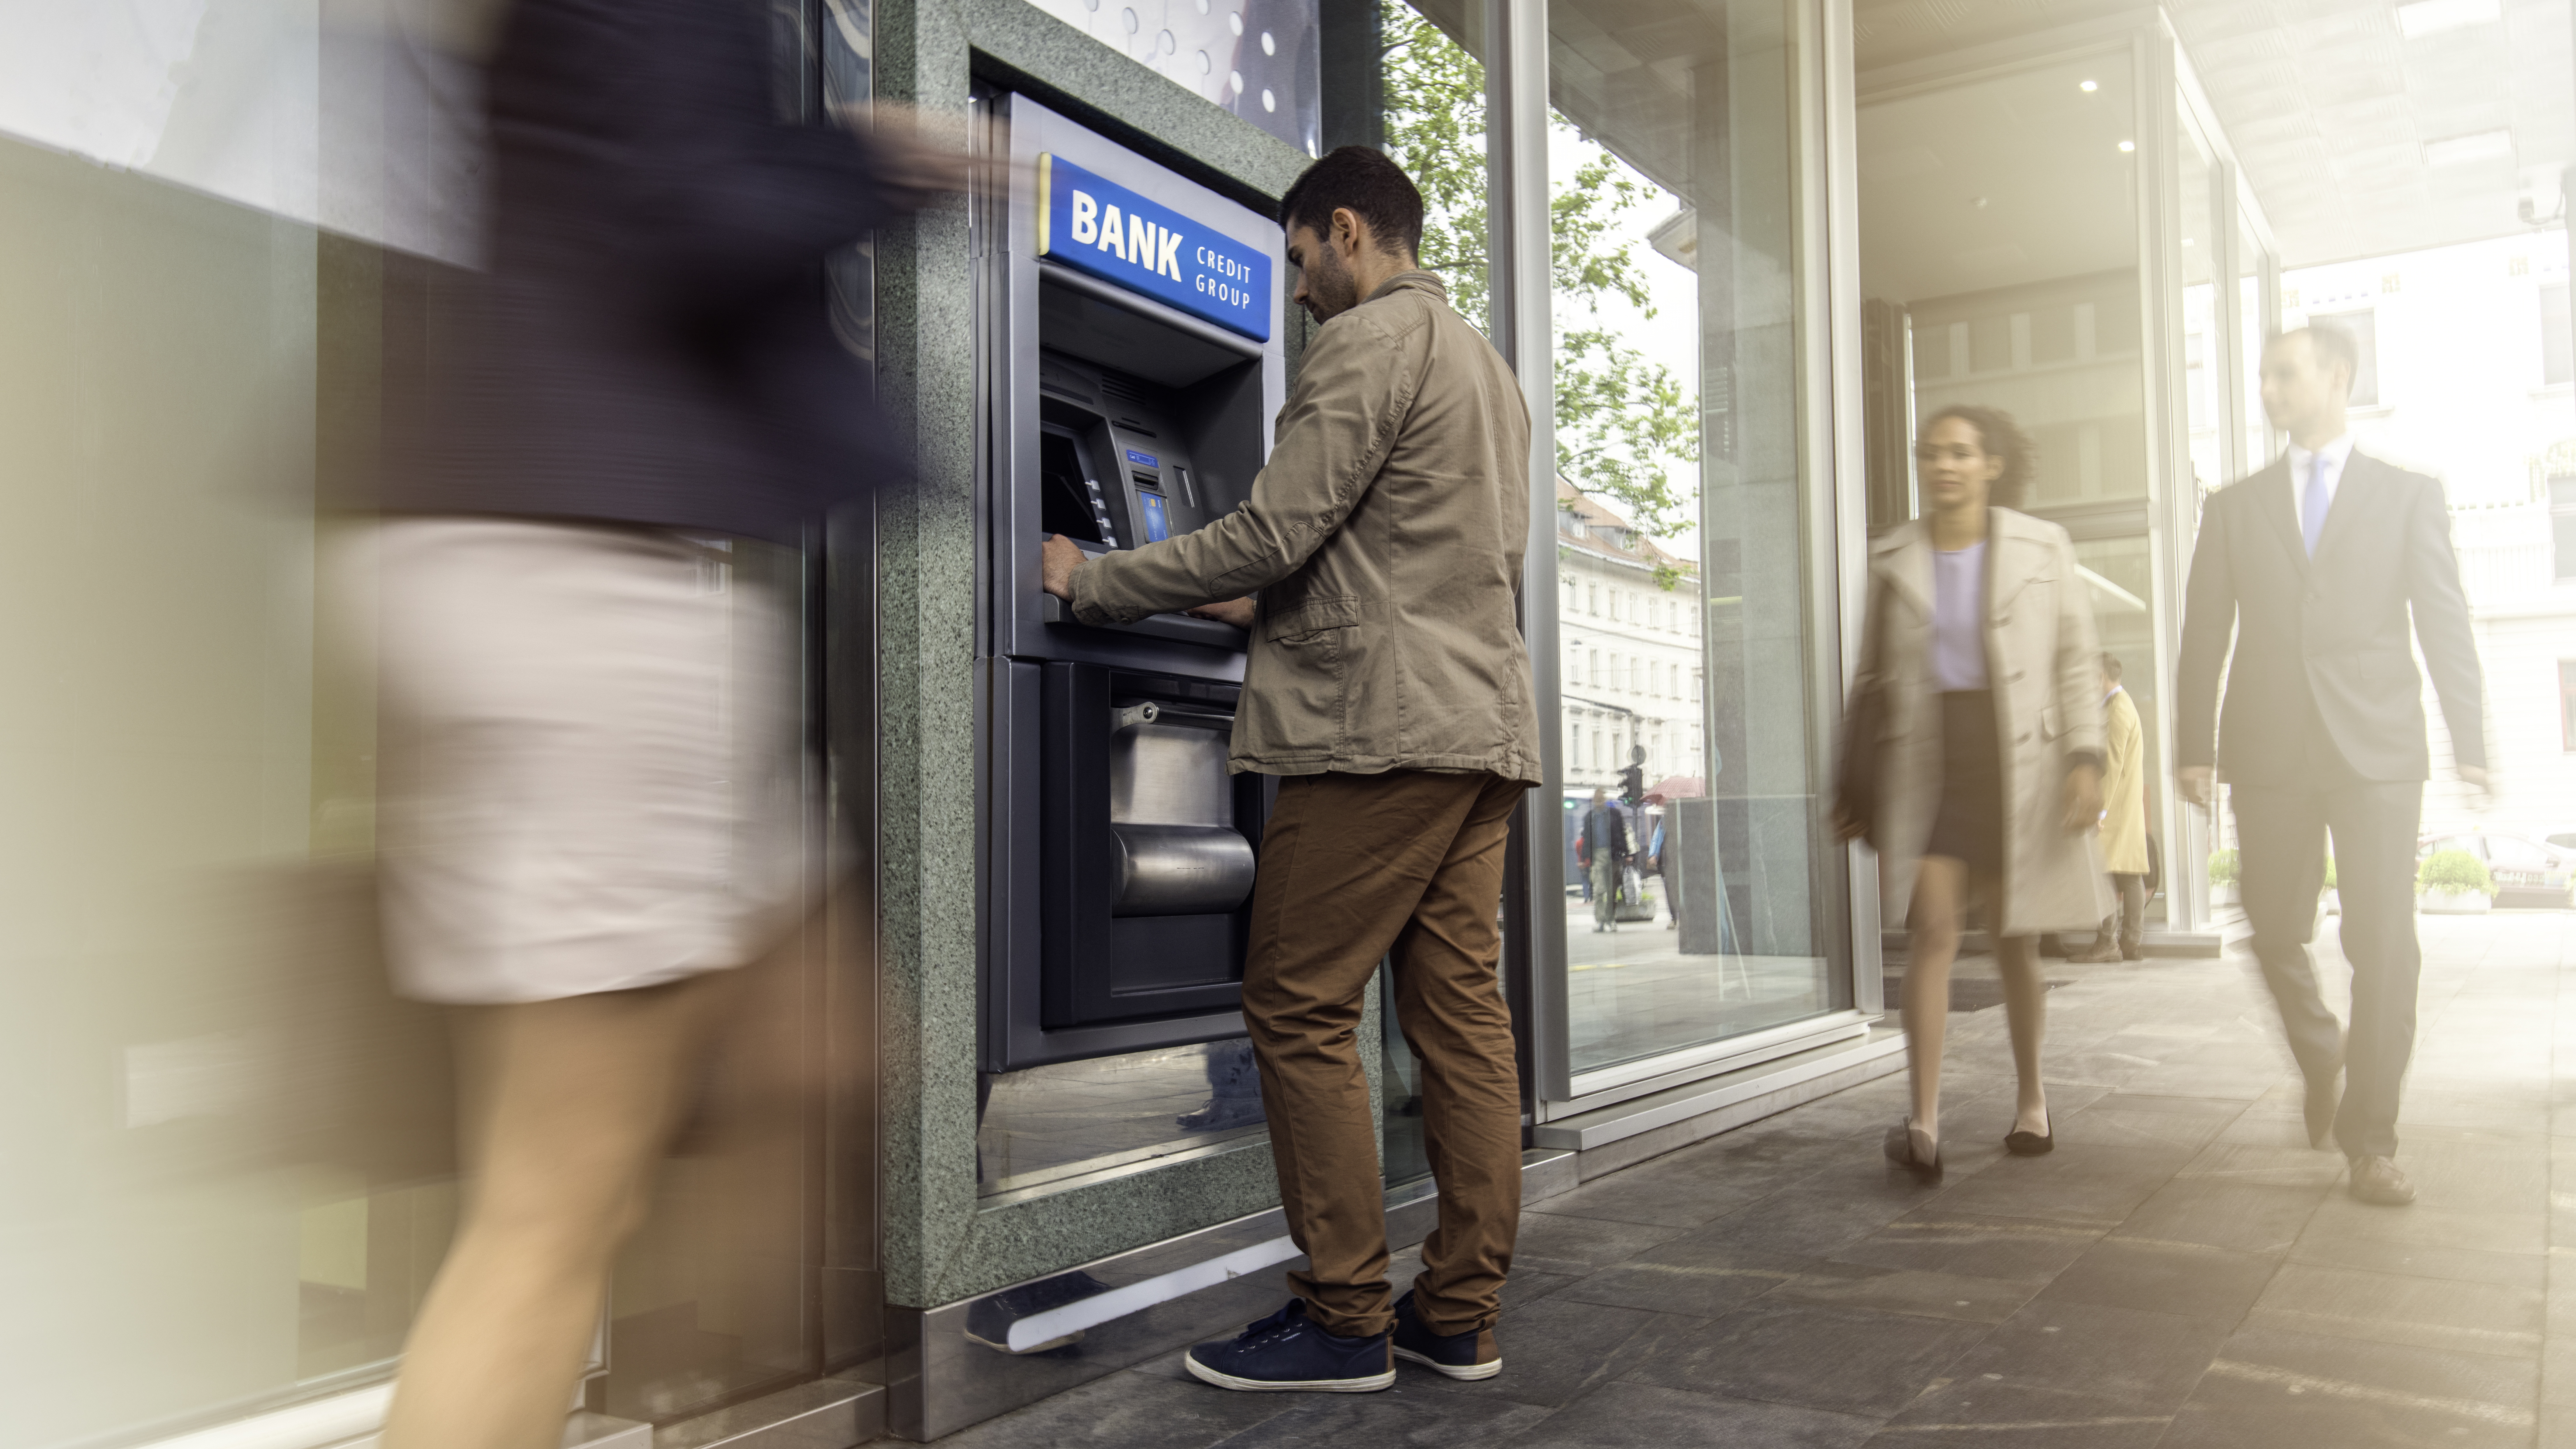 Traditional fintech, like ATMs, play a central role in smart branches. Emerging technology is important to consider as well.